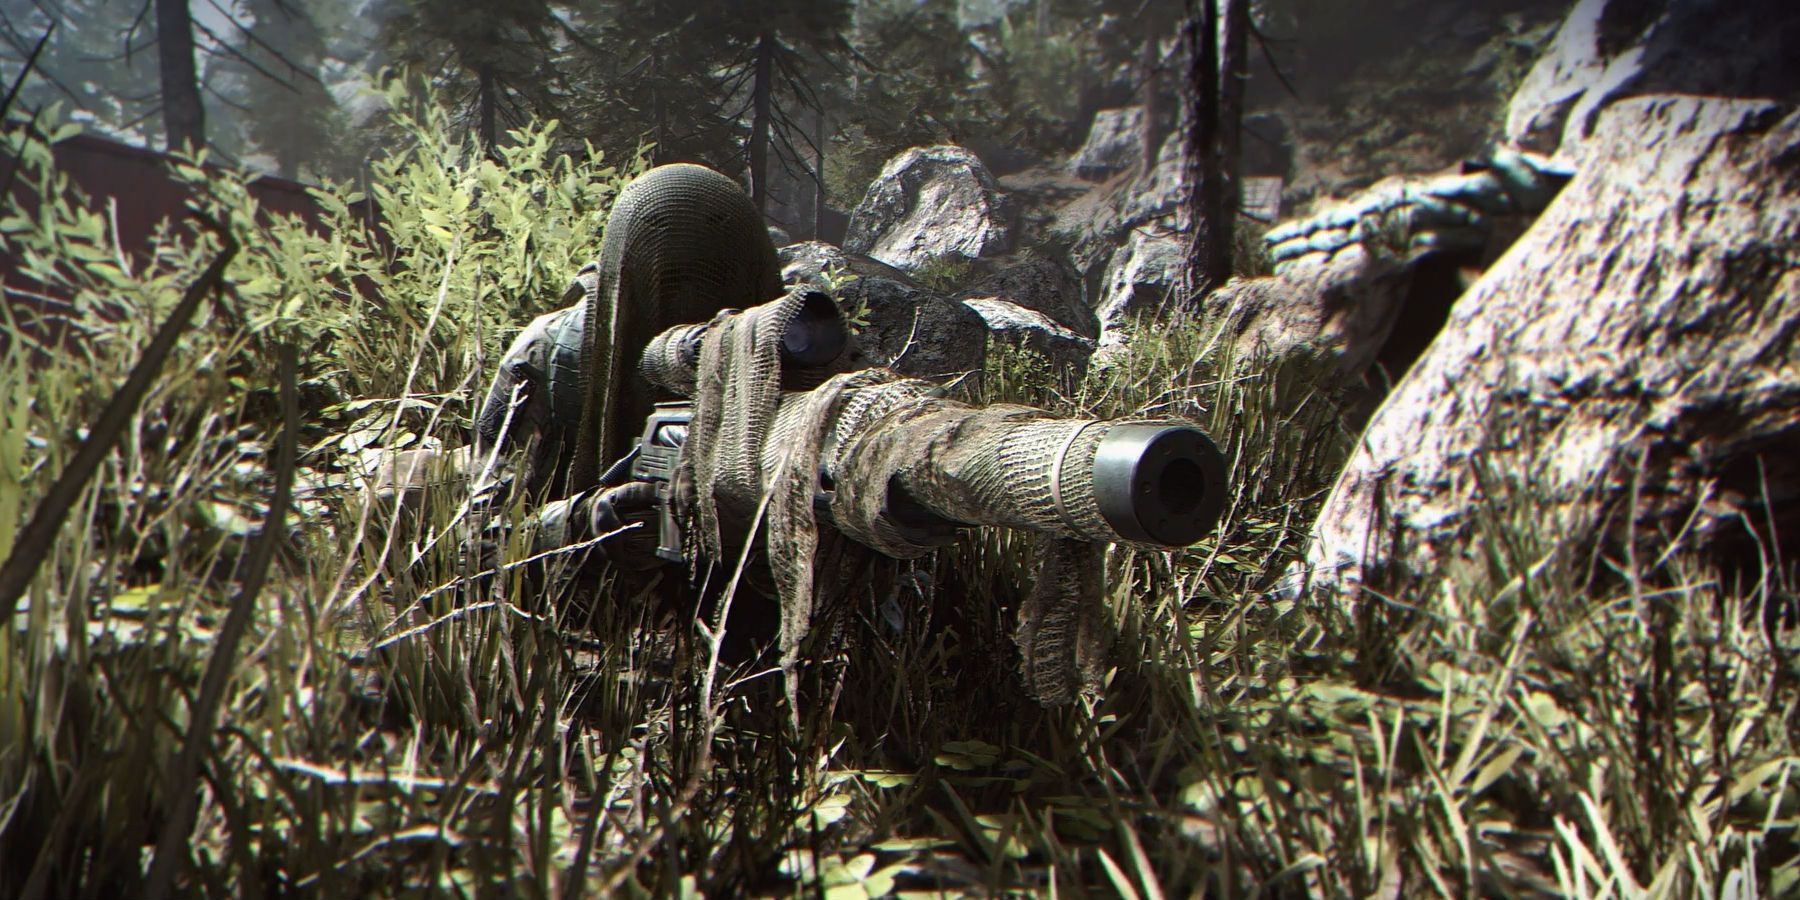 Call Of Duty lures a fugitive out of hiding and leads to his arrest